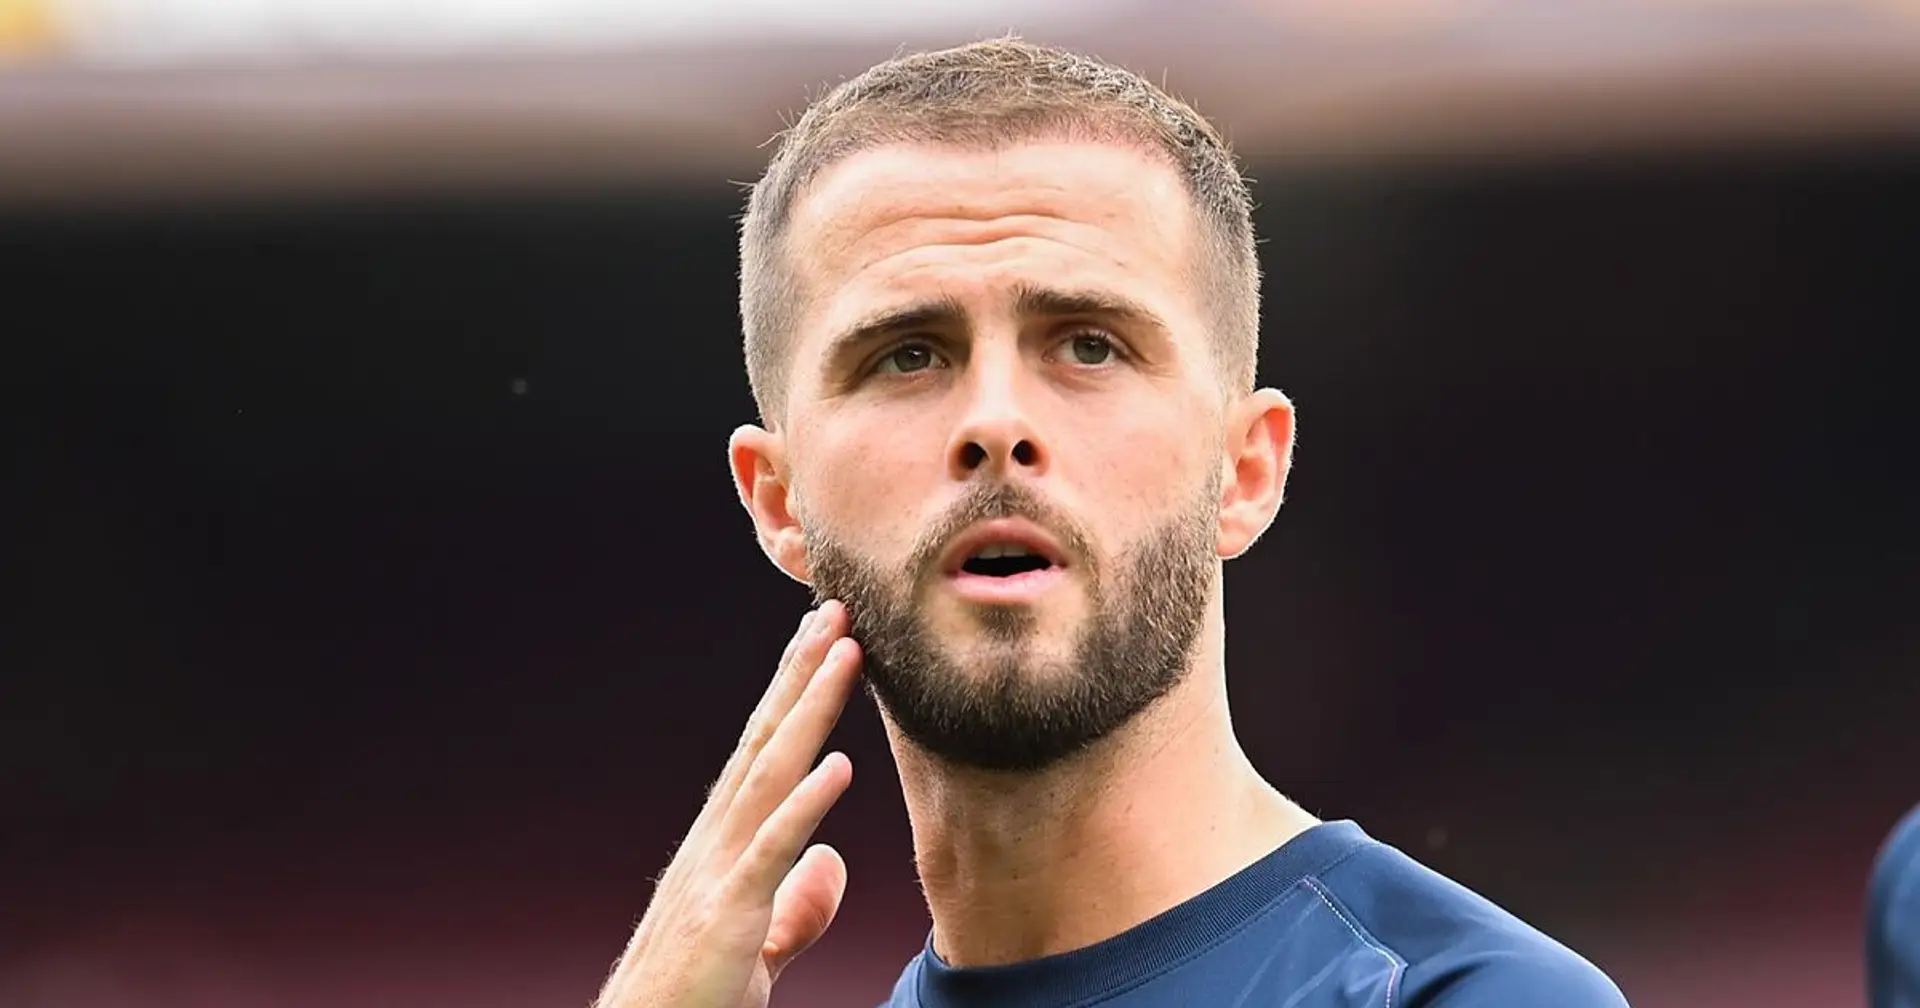 Marseille interested in Pjanic loan, player doesn't want to lose money - multiple reports